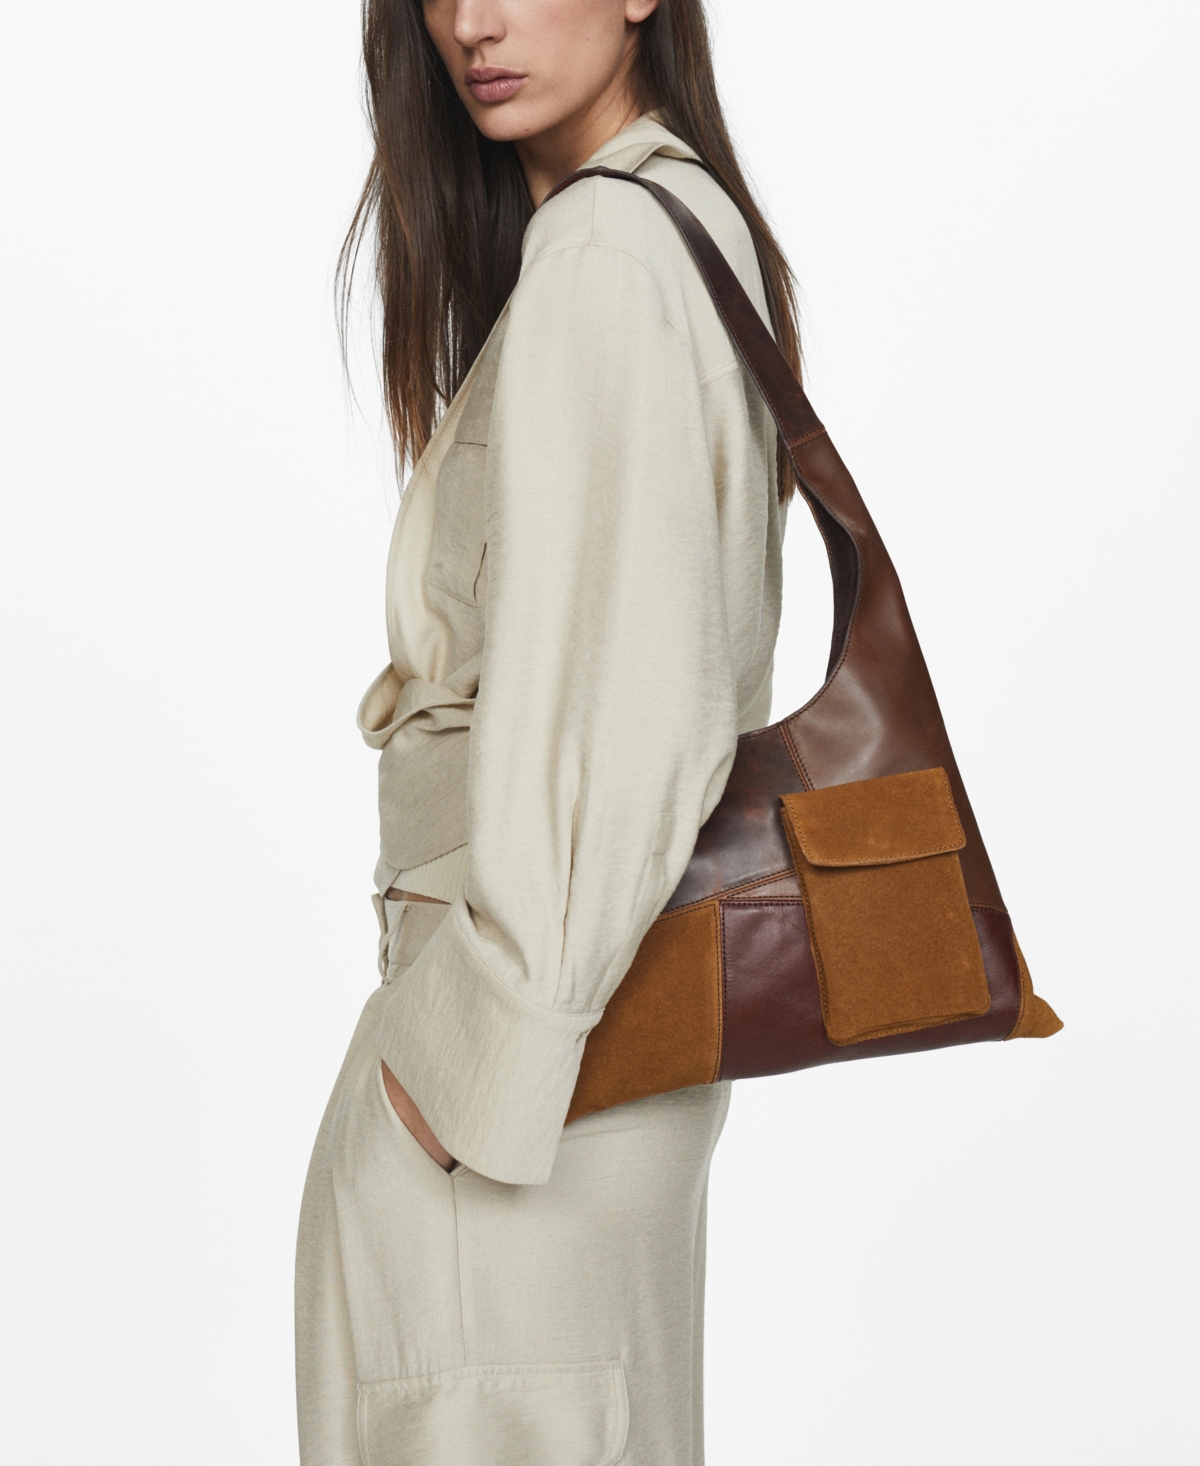 Women's Patchwork Leather Bag - Brown